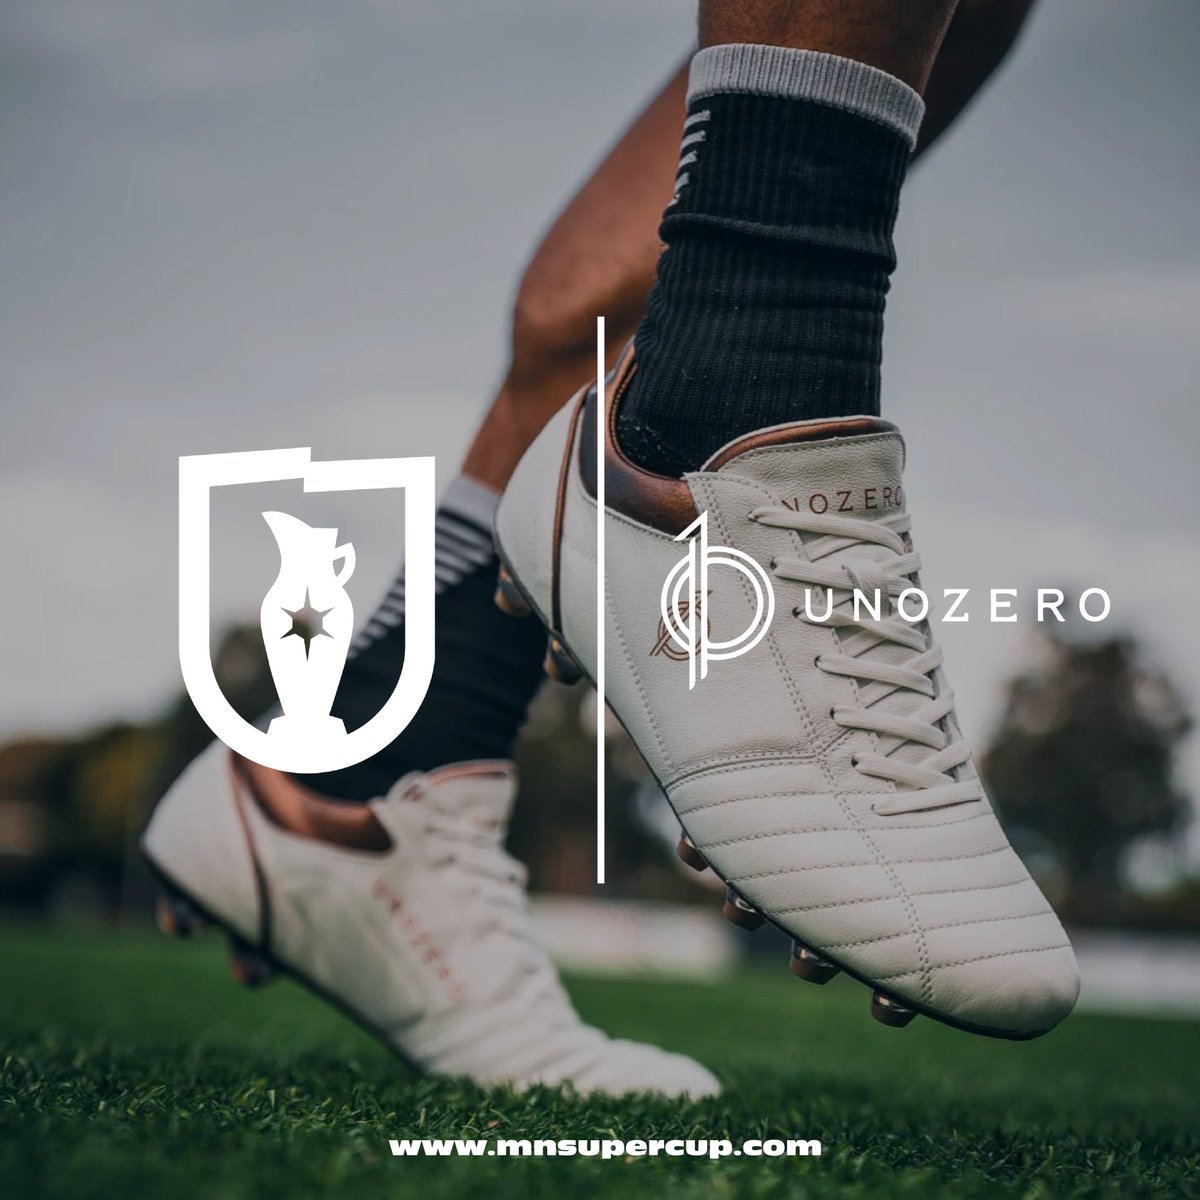 Designed by hand to help you make your mark on the beautiful game. The #MinnesotaSuperCup is stoked to partner with @UNOZEROfootball and their premium cleats, whose modern design and quality simply can’t be outpaced. Step up your strike with UNOZERO!